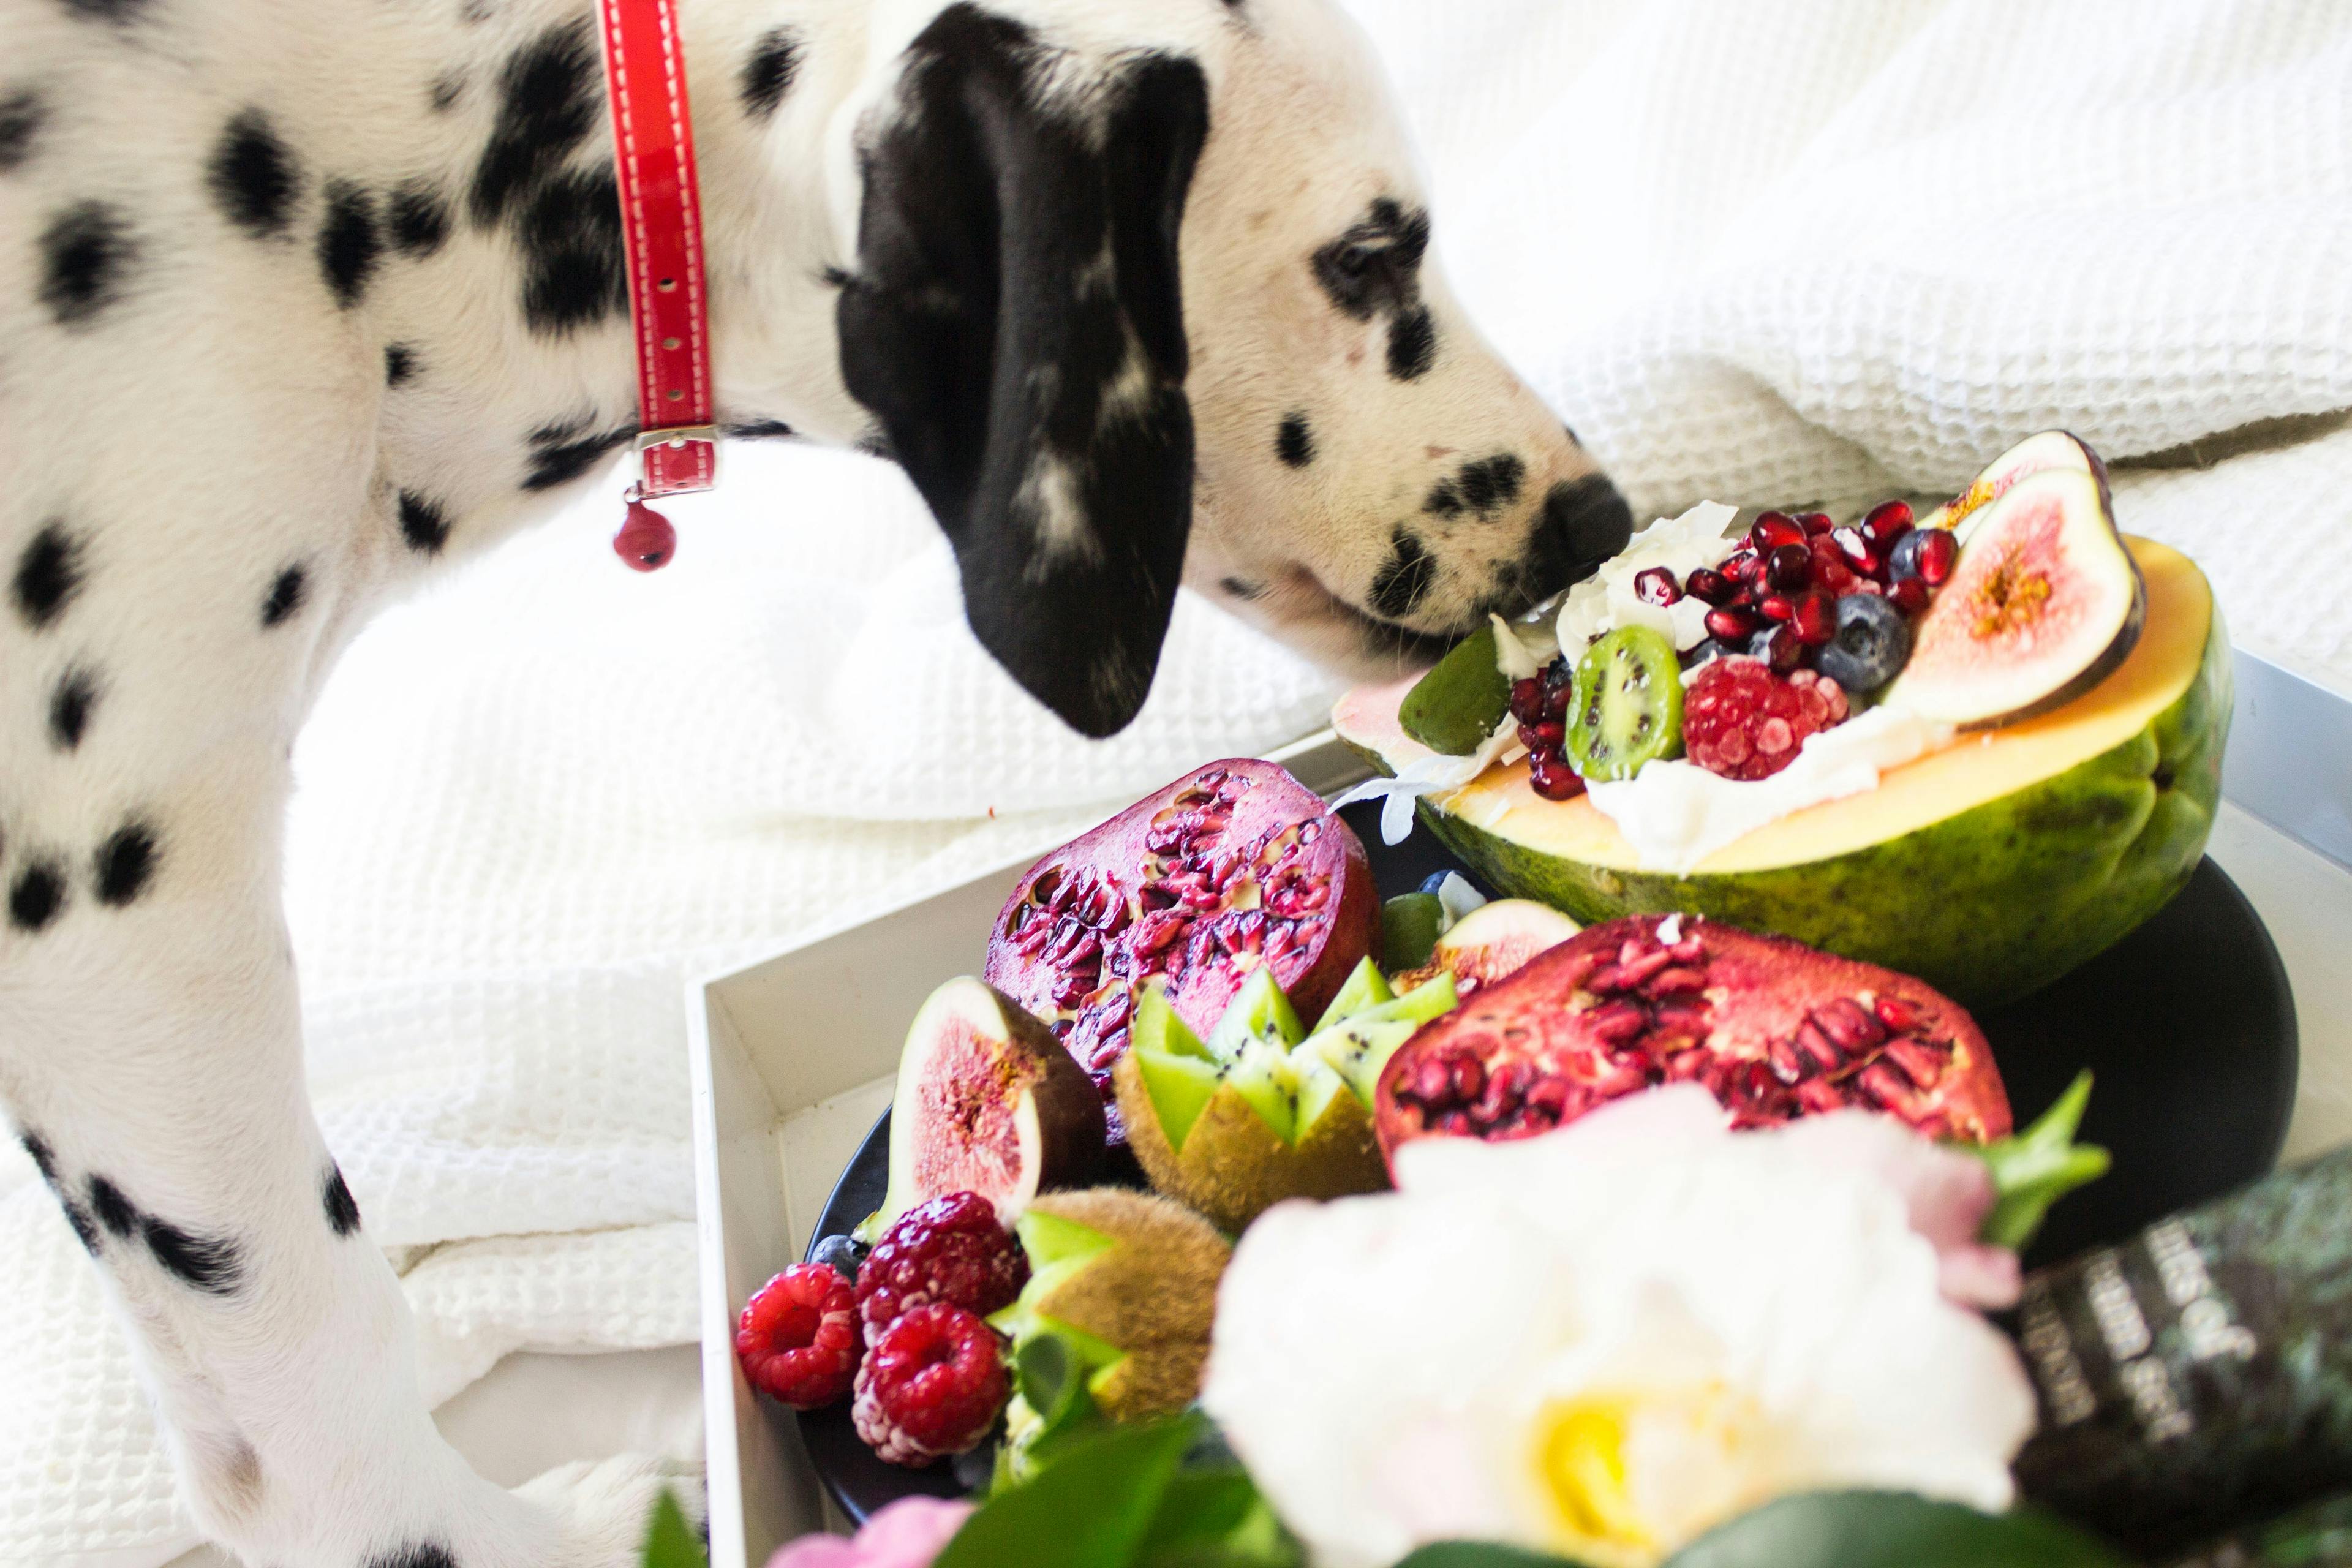 Dalmatian dog eating watermelon surrounded by other fruits and vegetables